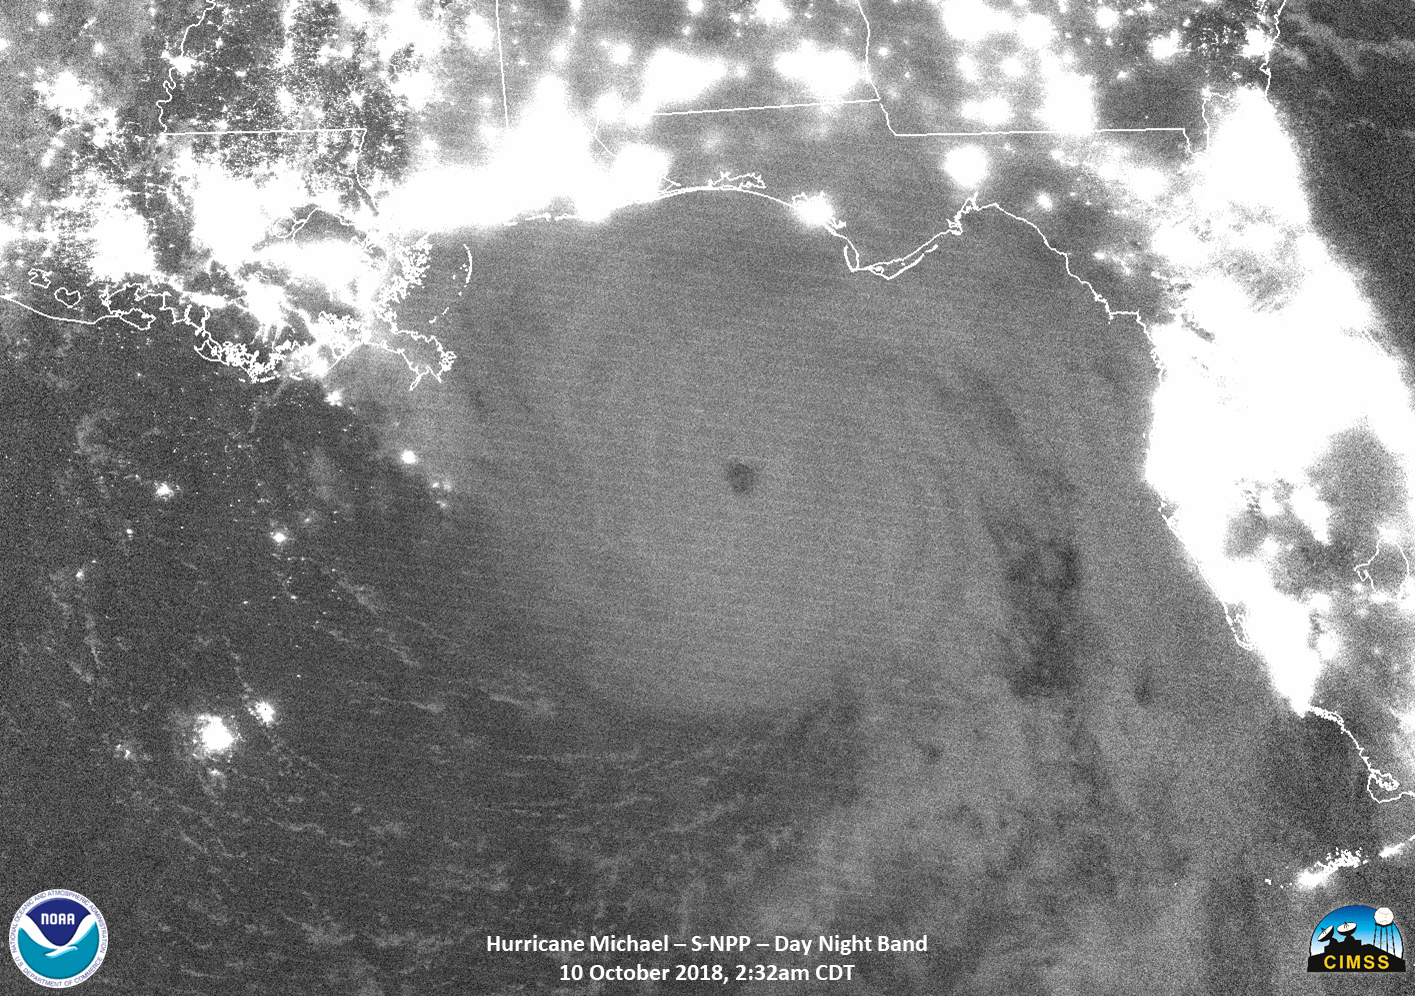 Suomi NPP VIIRS Day/Night Band (0.7 µm) and Infrared Window (11.45 µm) images [click to enlarge]